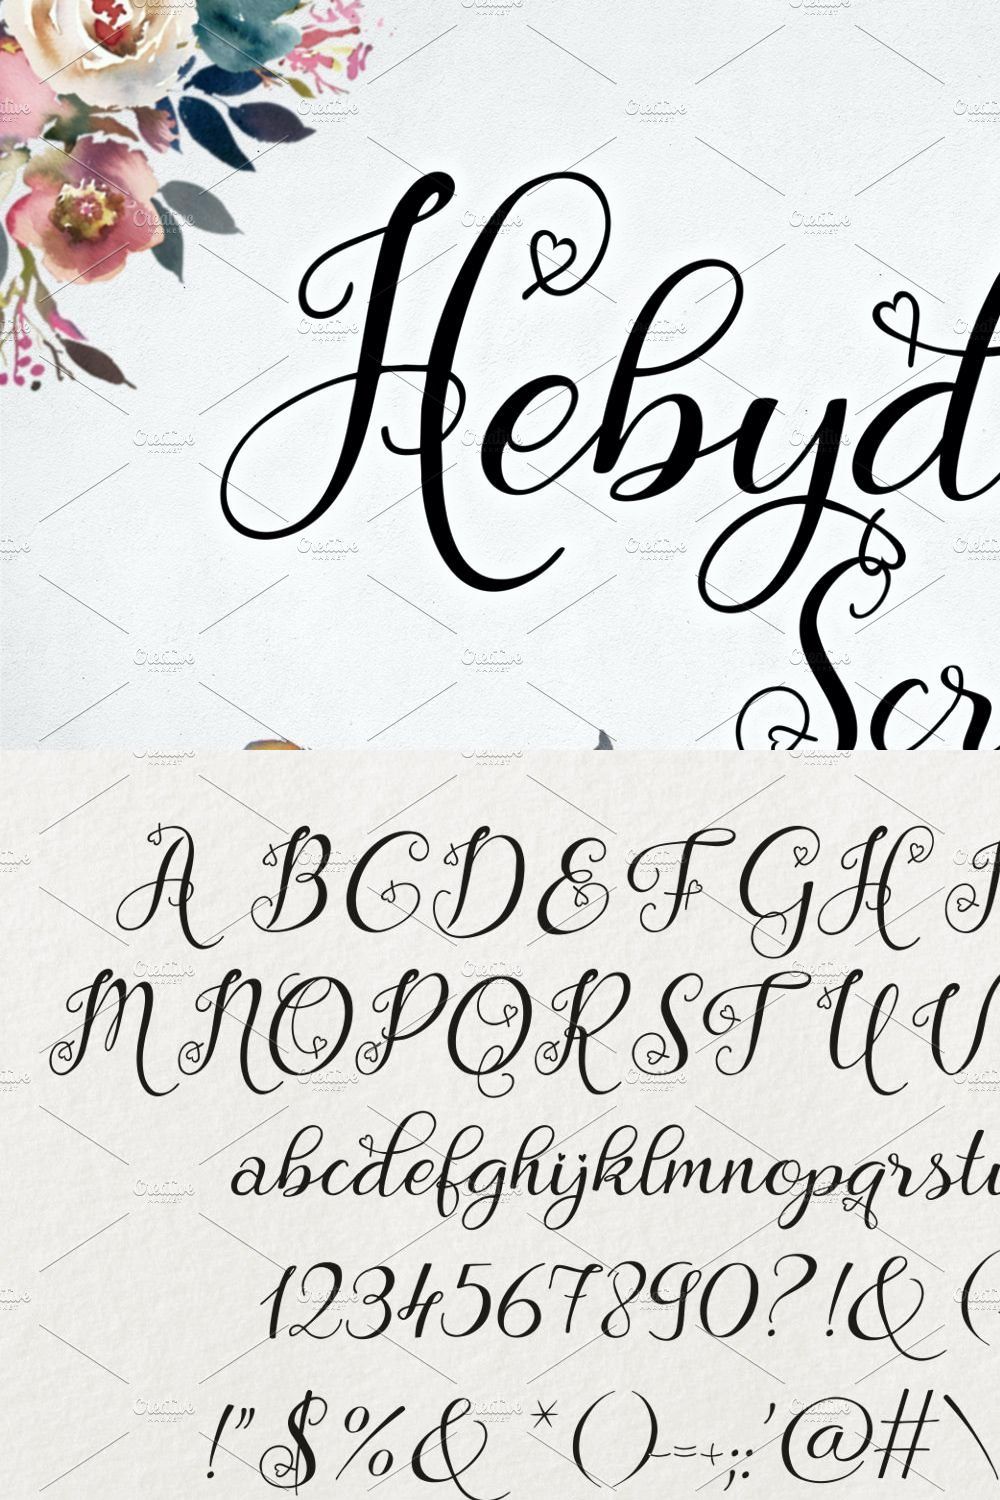 Hebydia pinterest preview image.